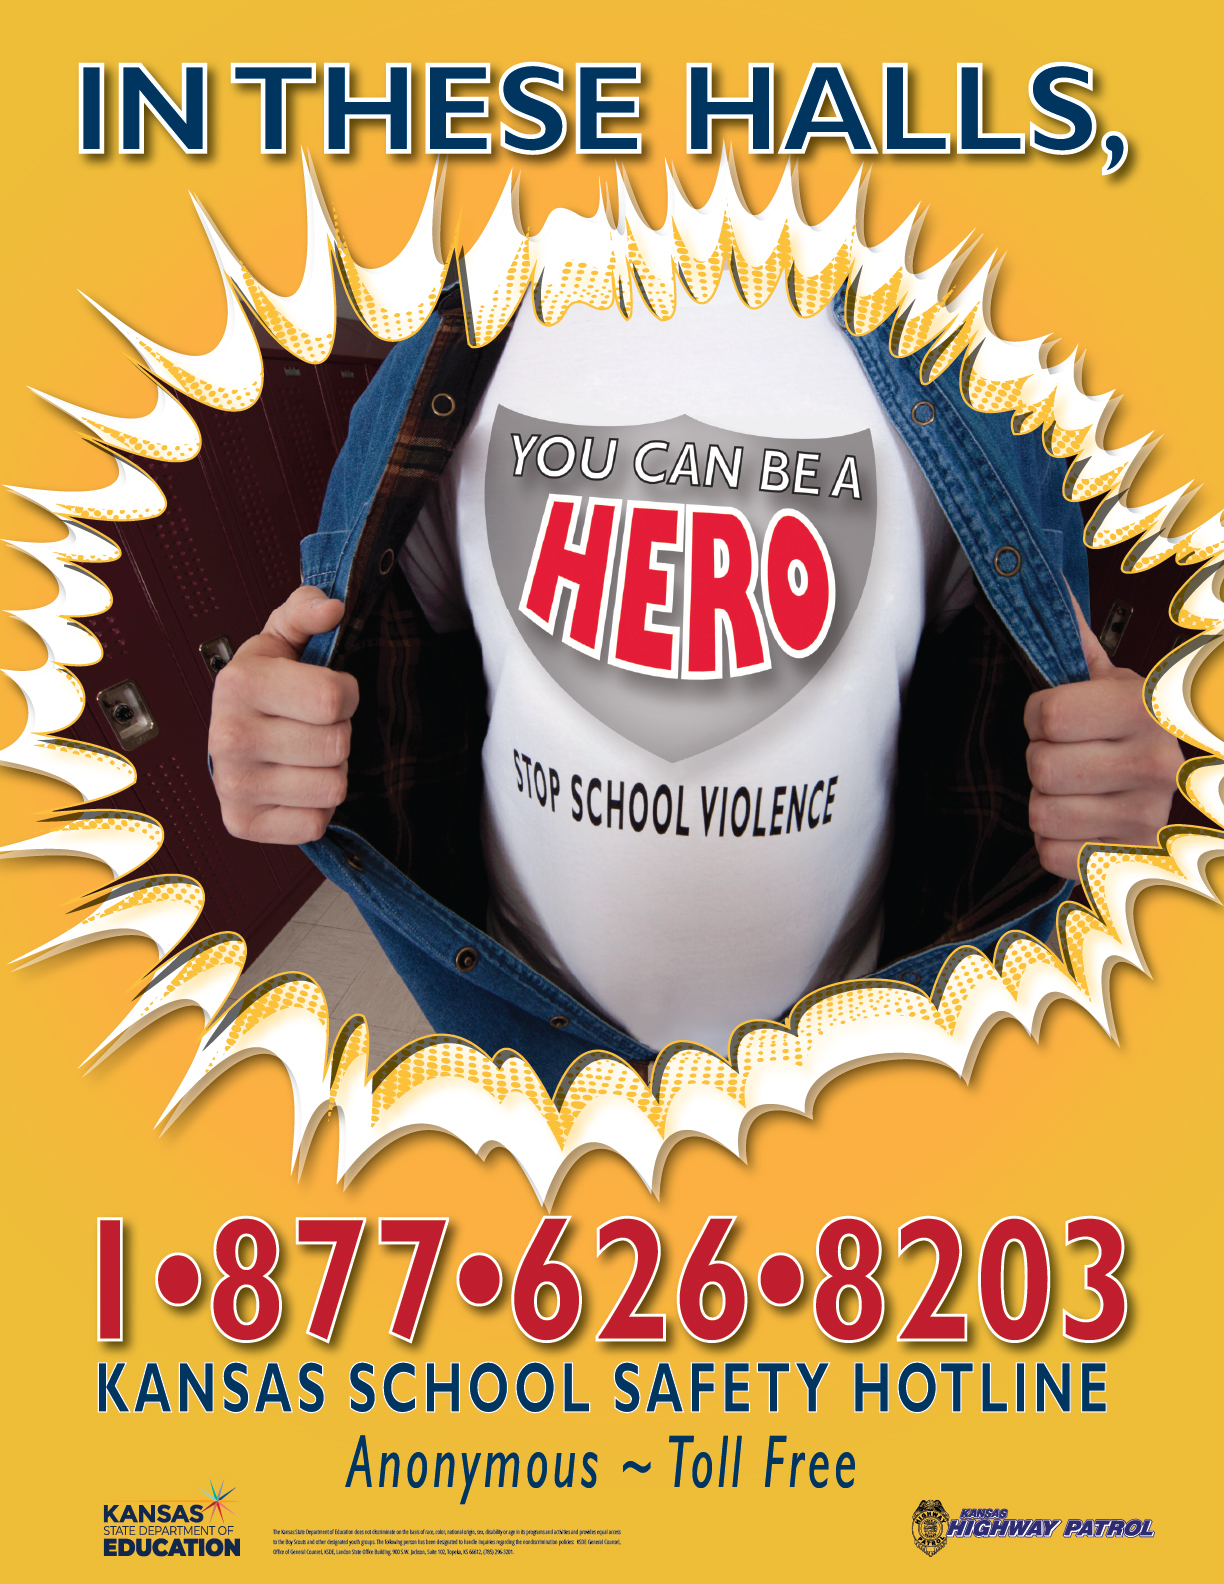 In these halls, Kansas School Safety Hotline Poster image